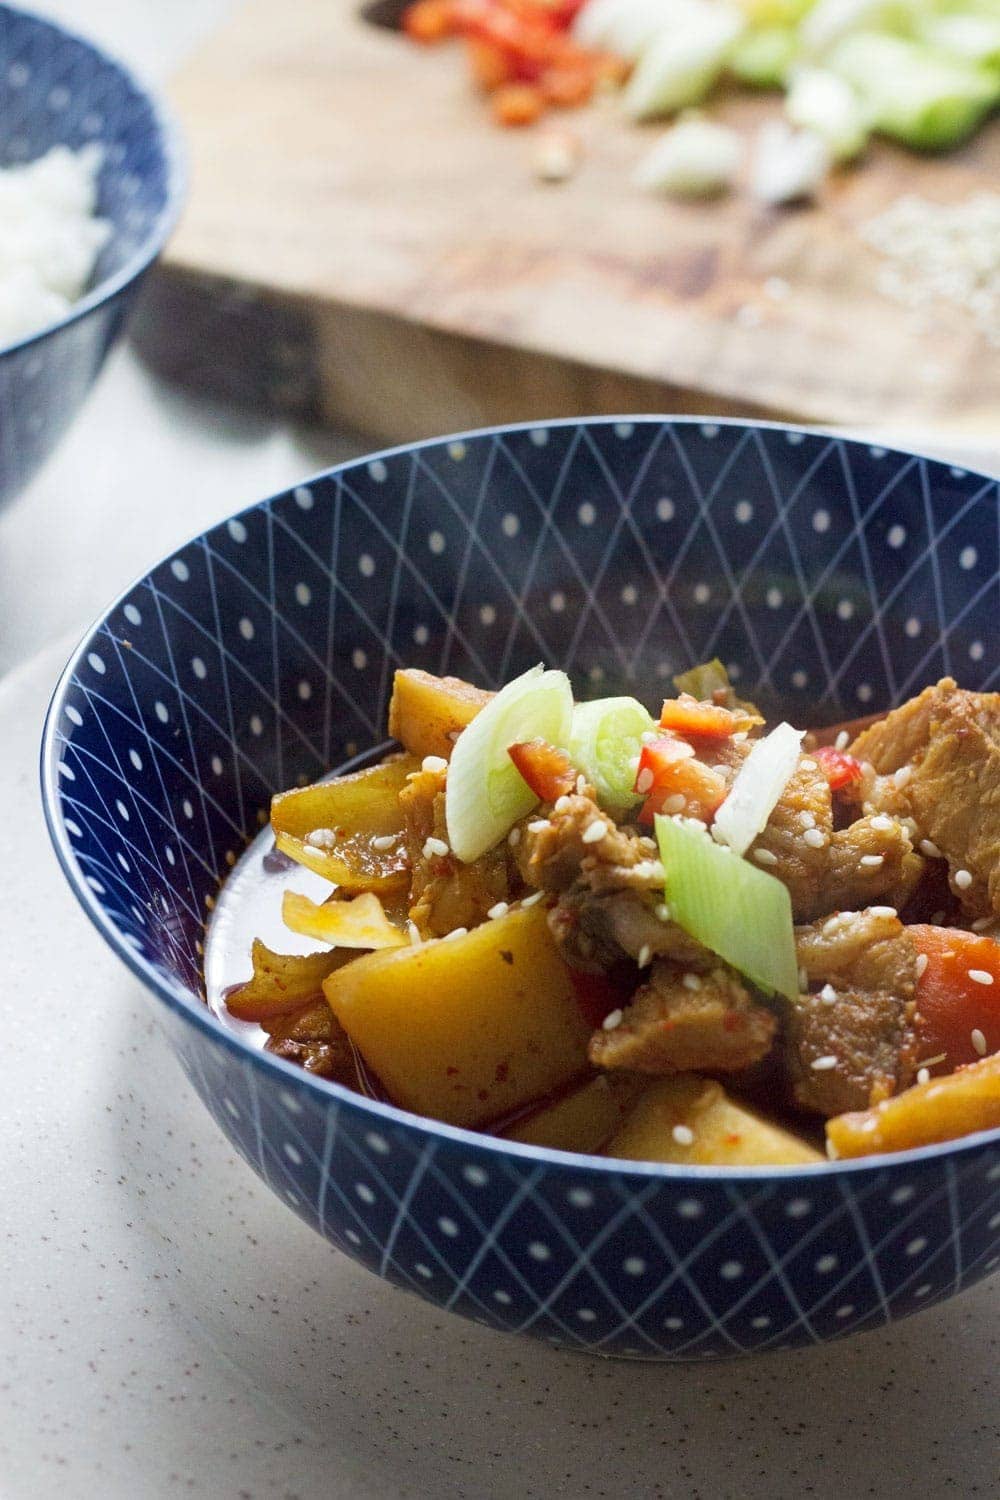 This Korean pork & potato stew is full of warm, spicy flavour. Slow cooking it makes the meat fall apart. It's the perfect winter warmer.